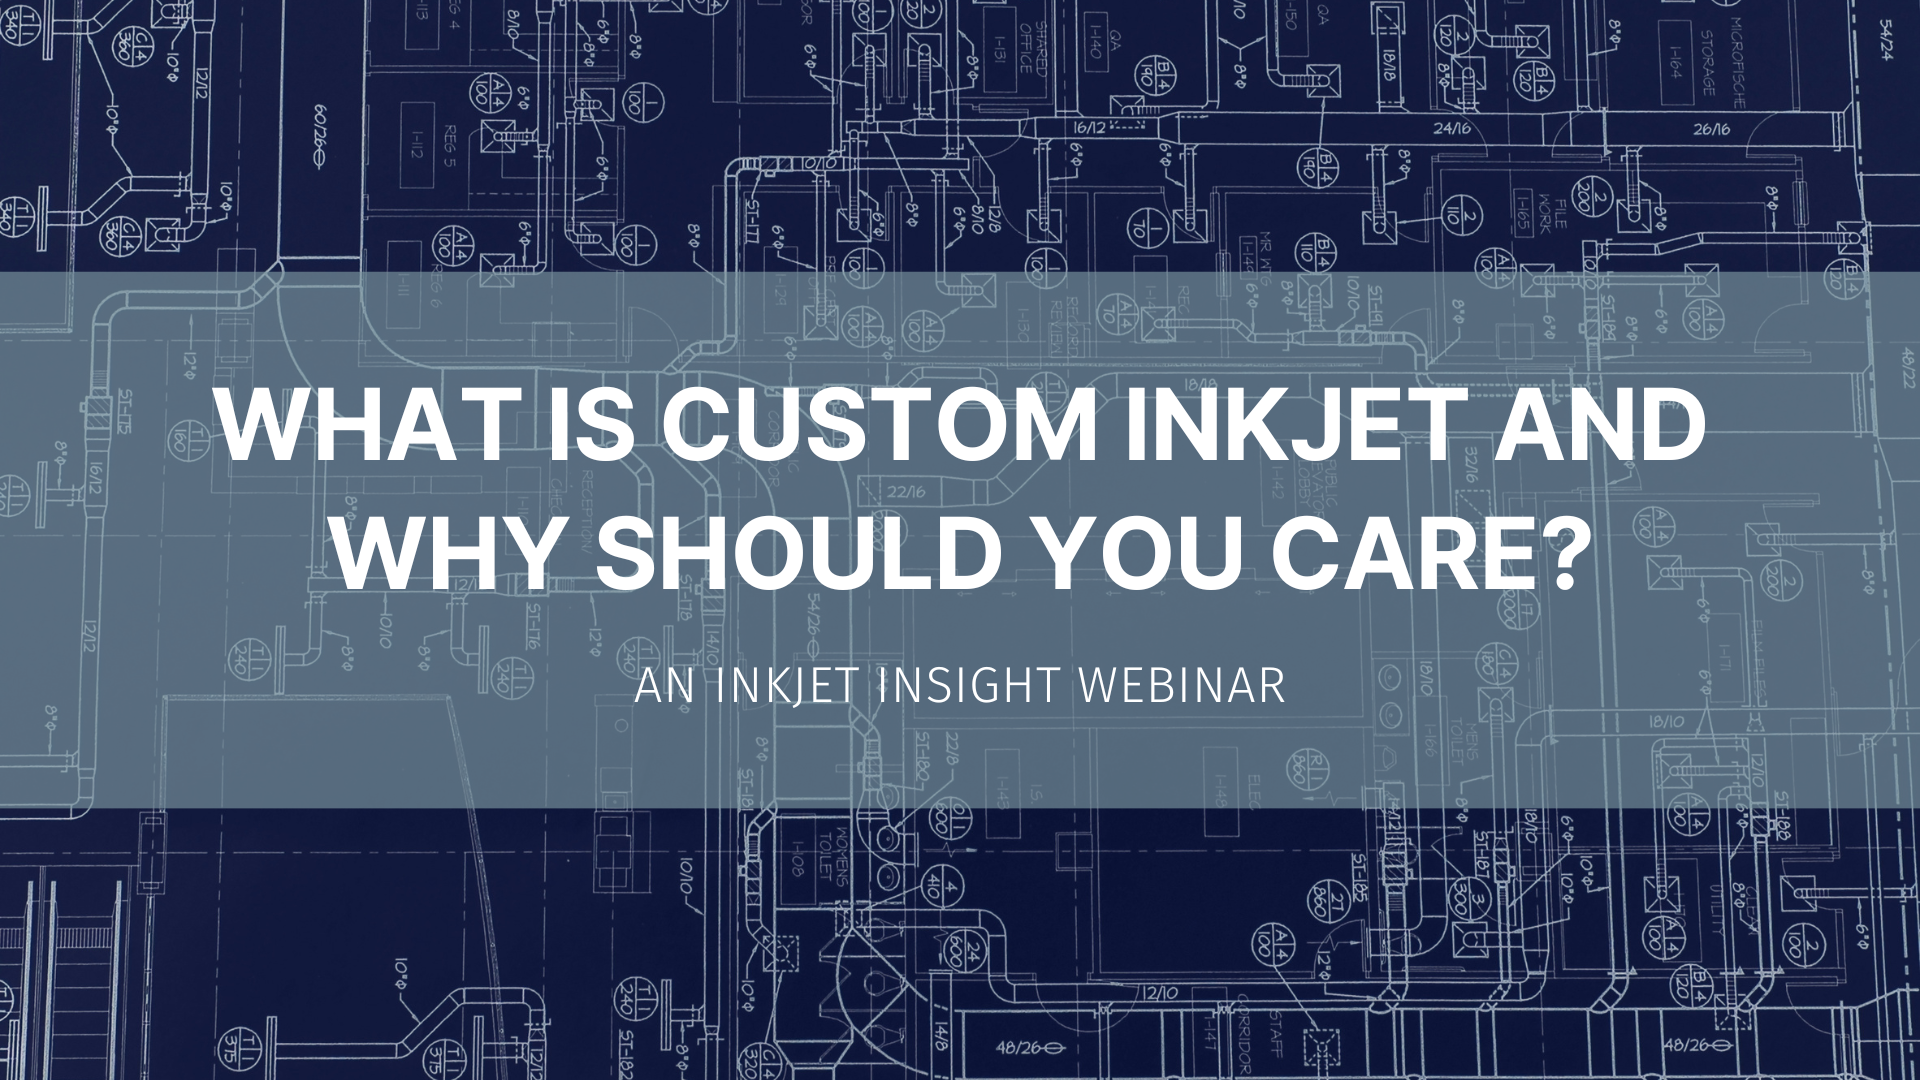 Featured image for “Inkjet Insight presents an Inkjet Explainer webinar featuring Mark Bale and Elizabeth Gooding”